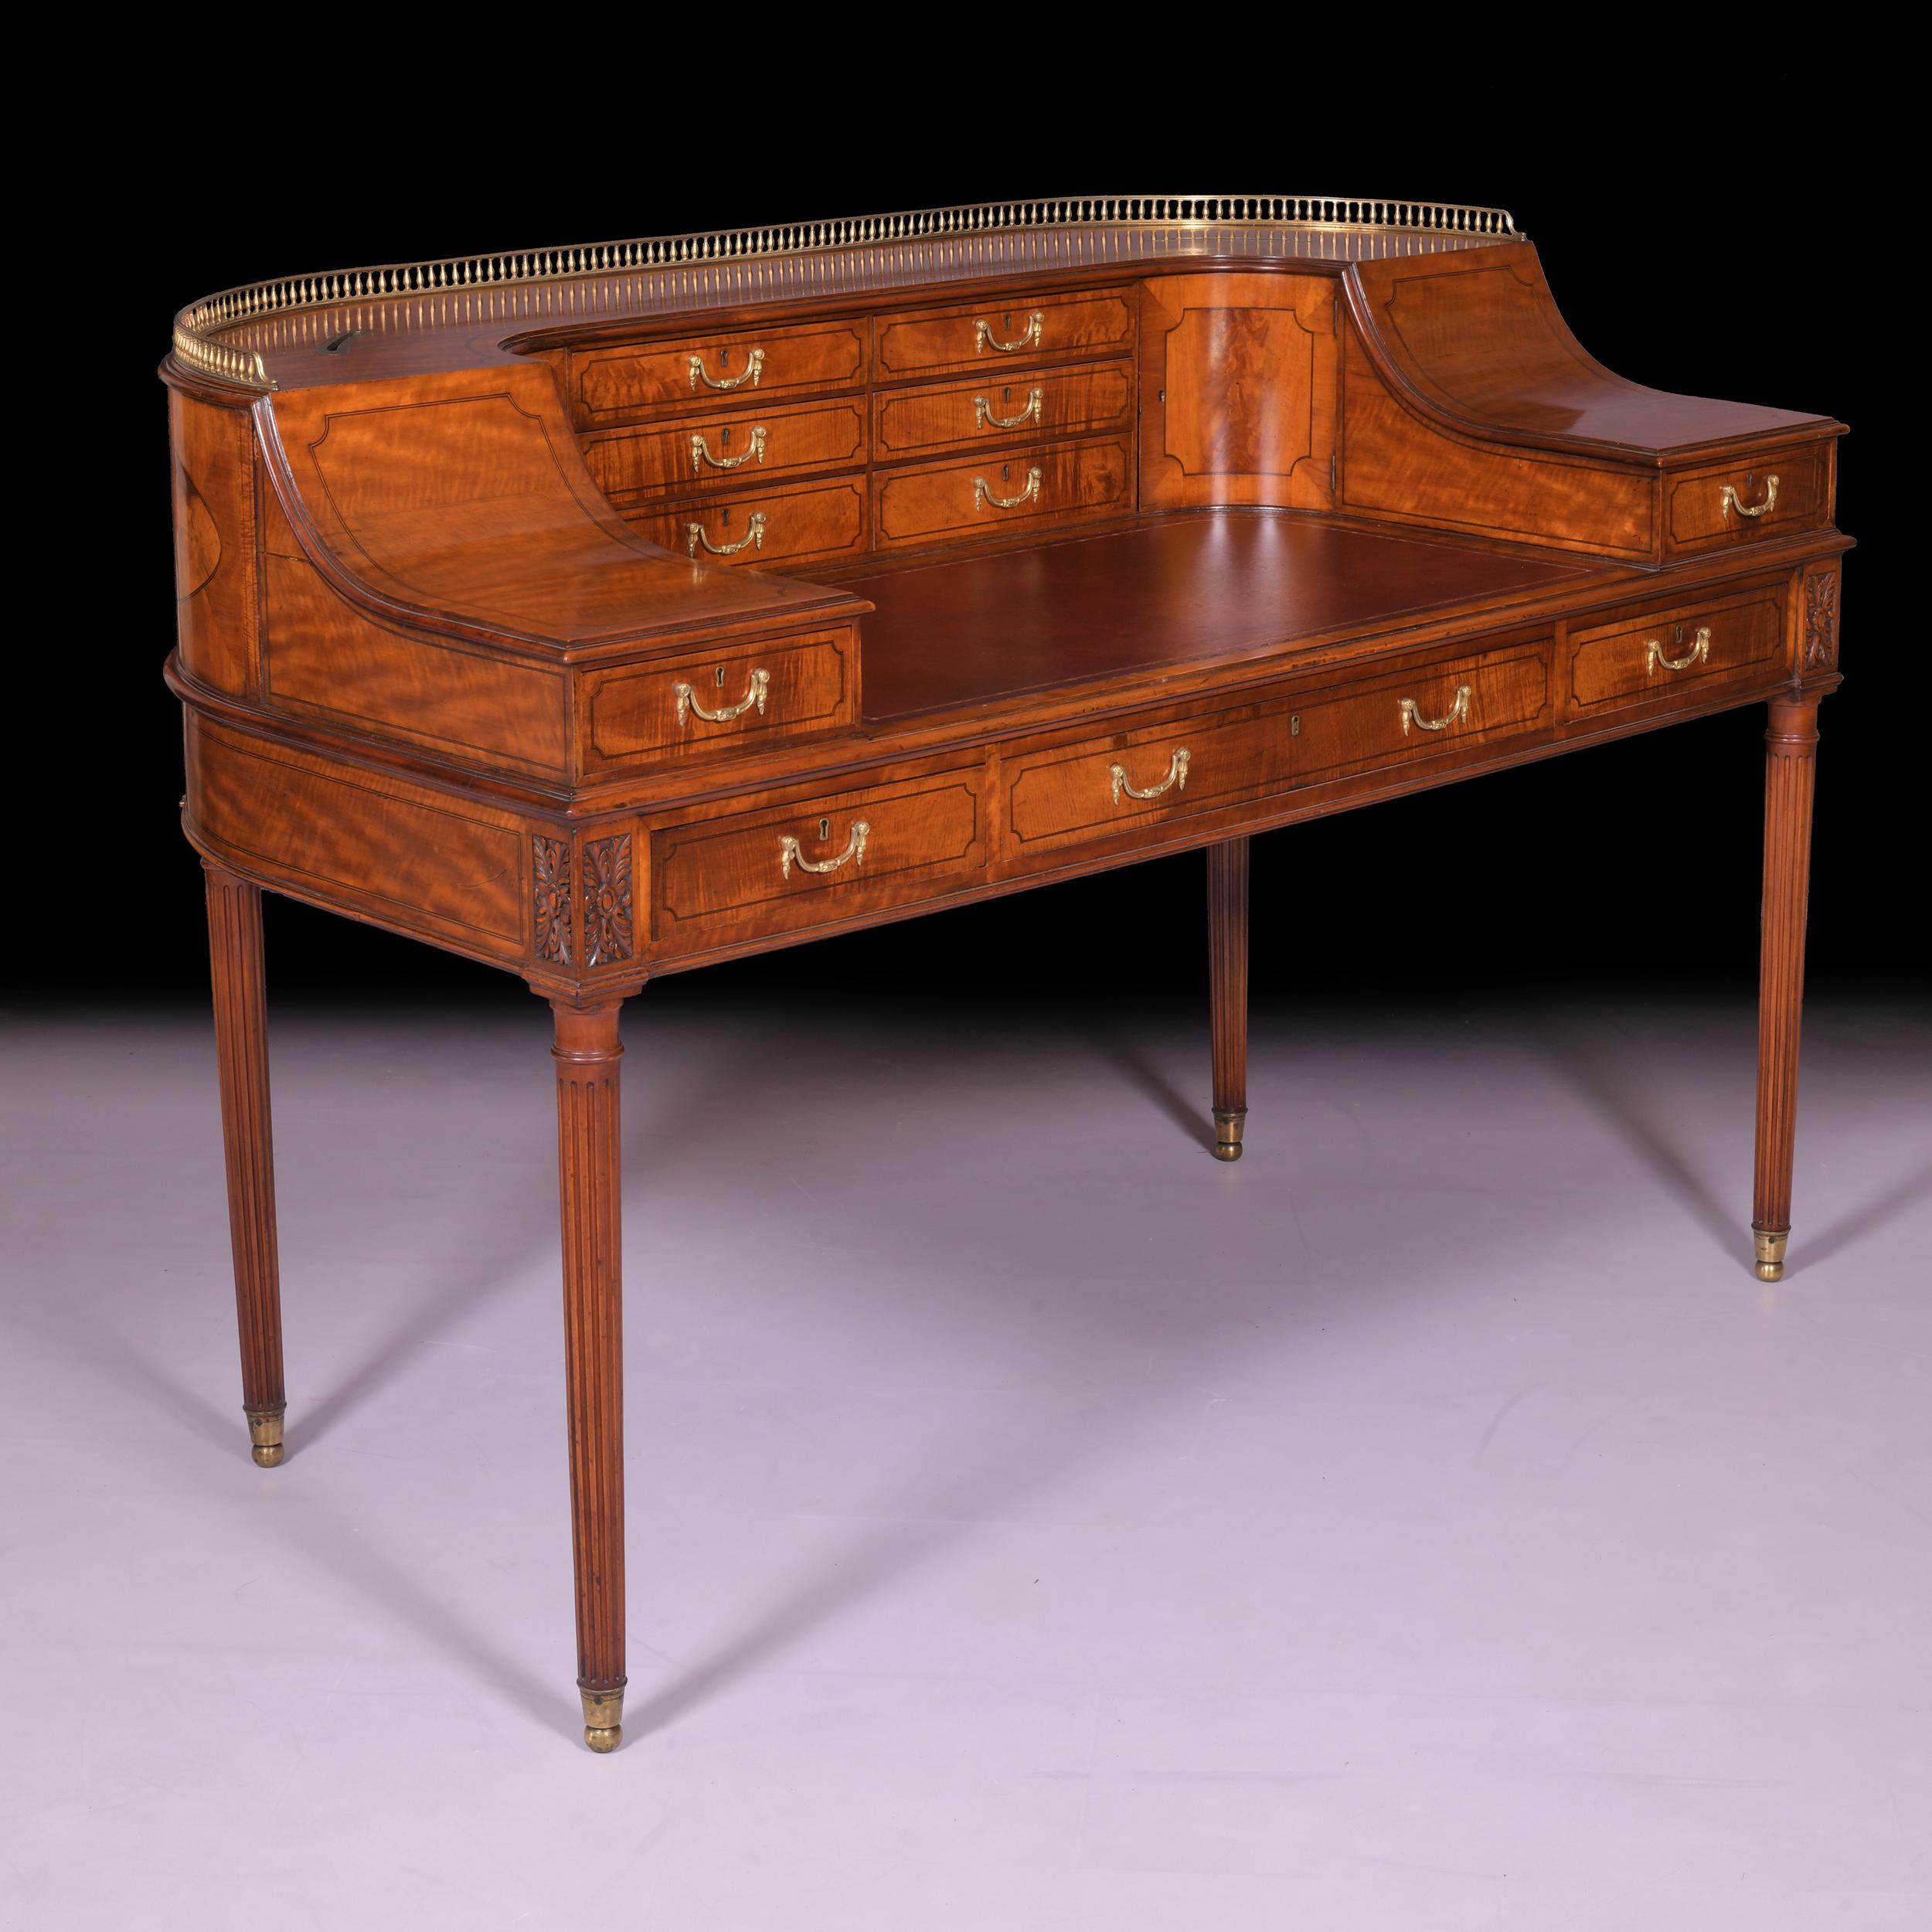 19th Century English Satinwood Carlton House Desk Attributed to Gillows For Sale 4